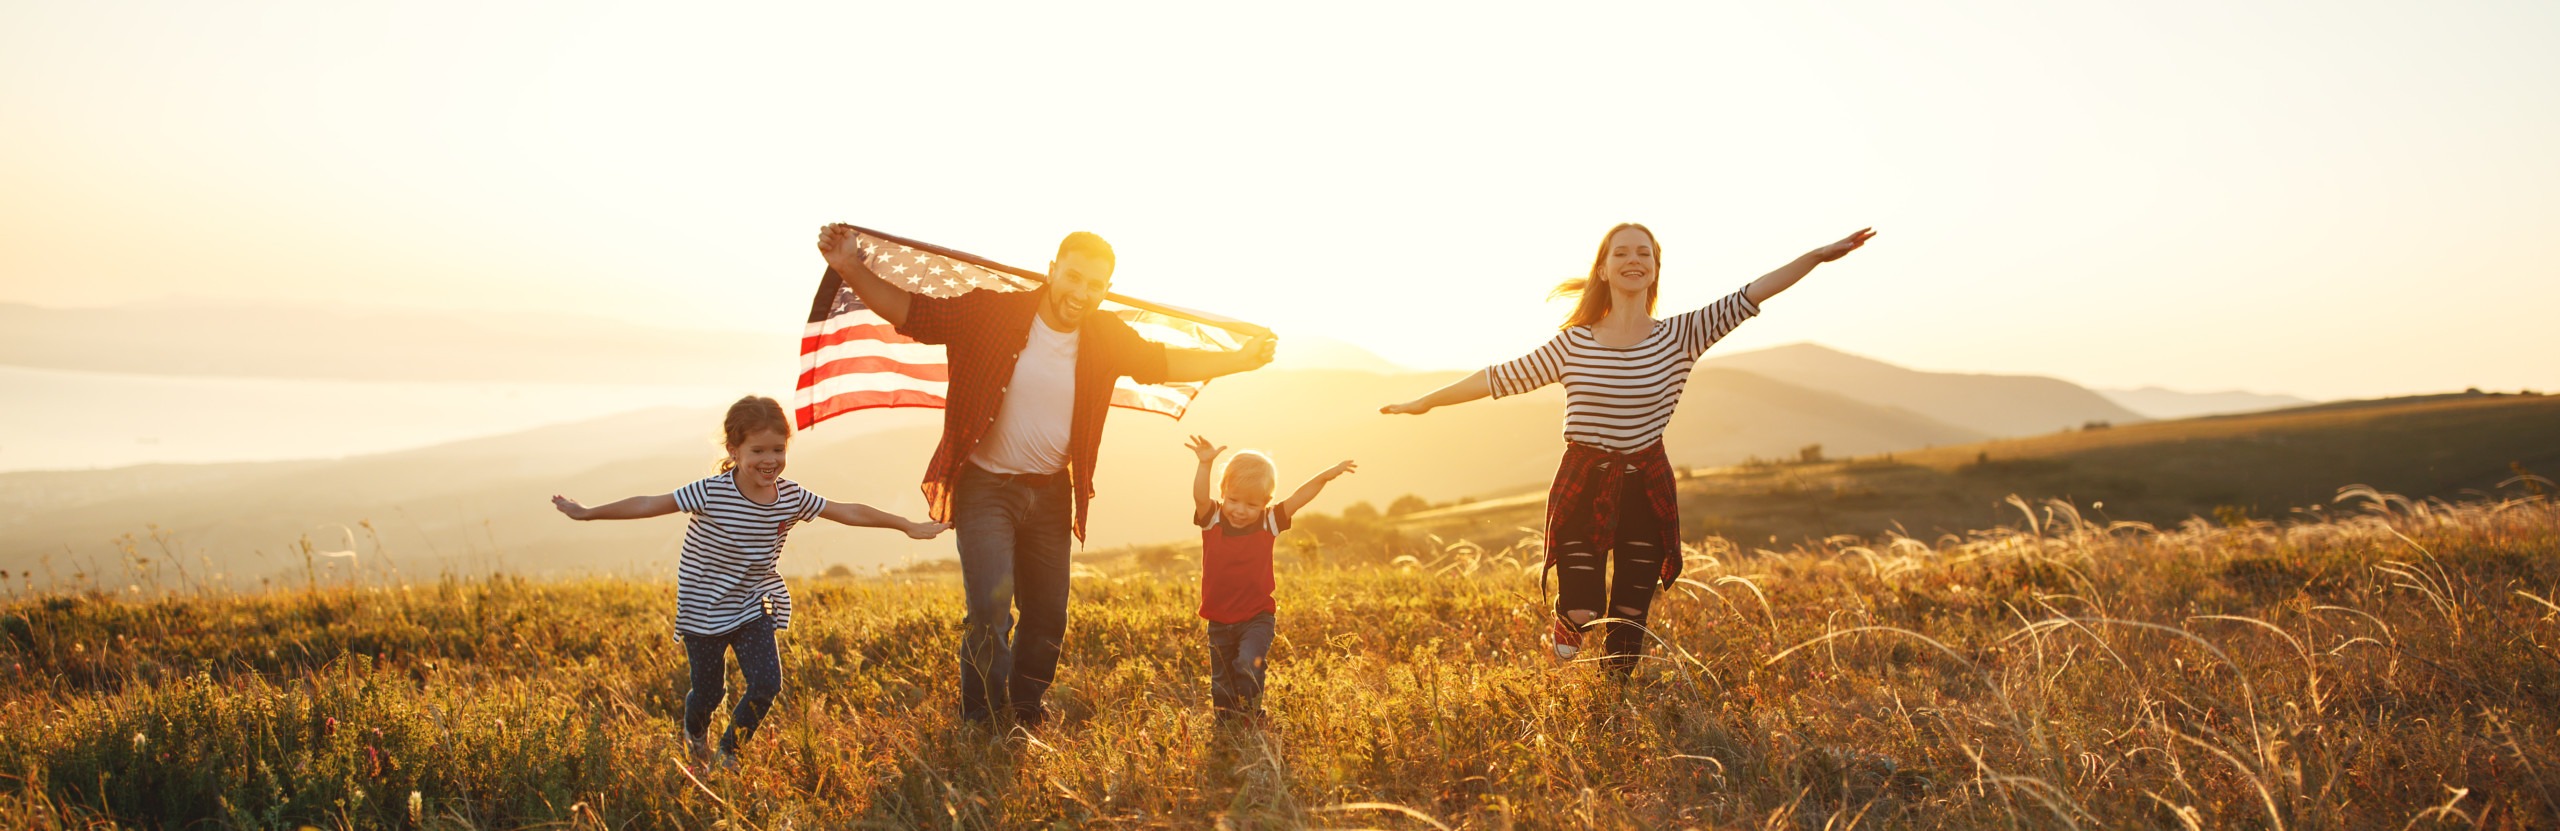 family in field with sunshine and flag